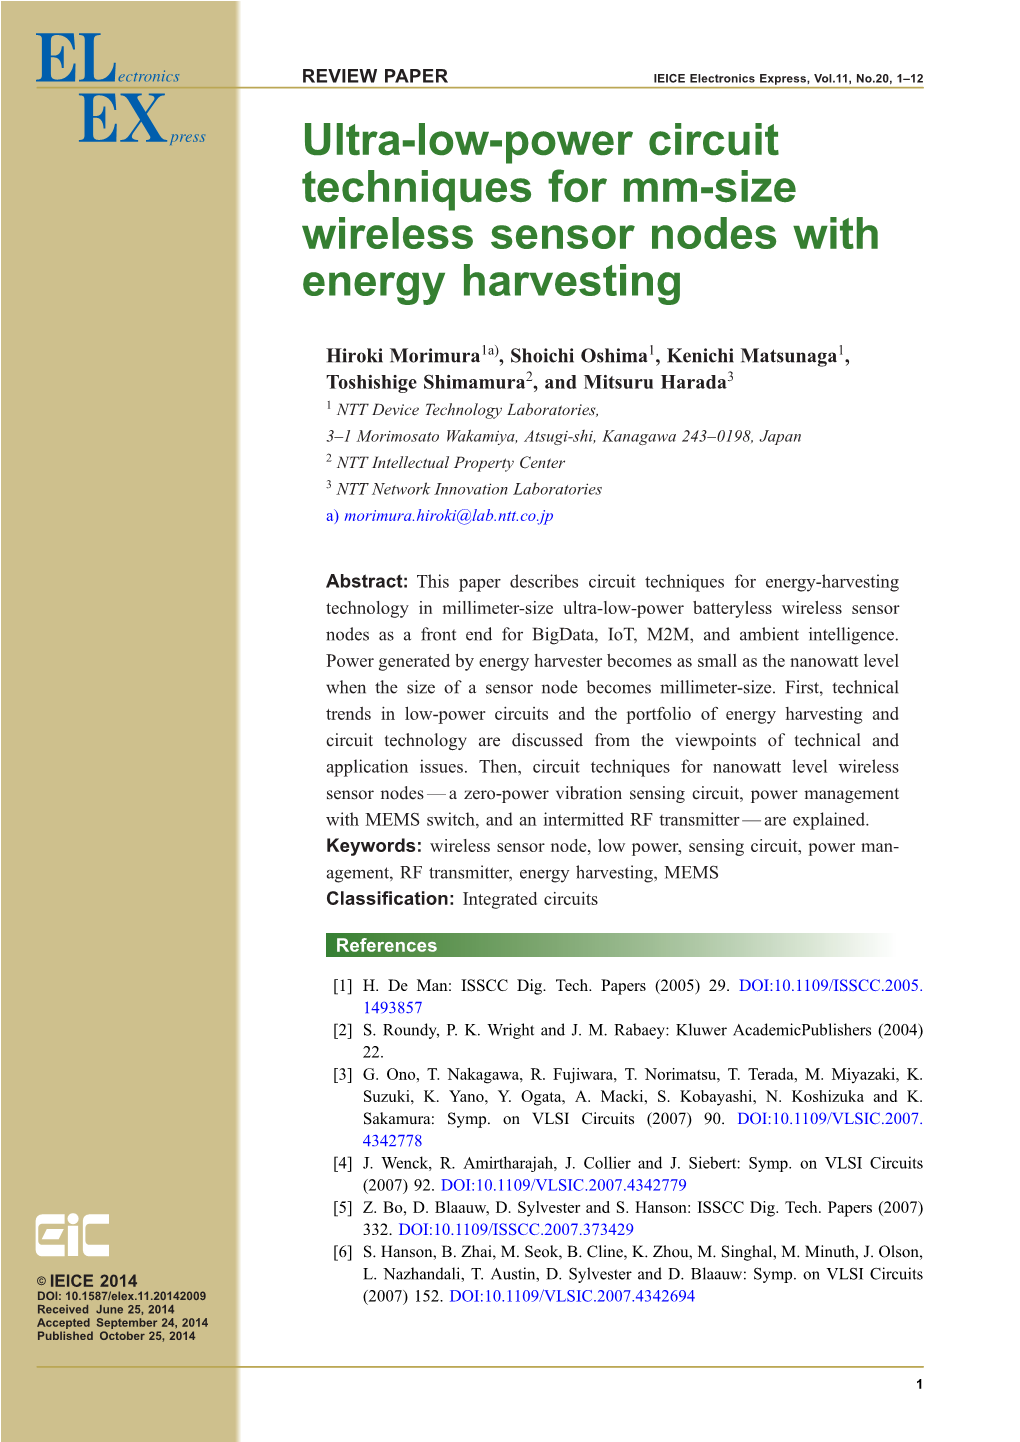 Ultra-Low-Power Circuit Techniques for Mm-Size Wireless Sensor Nodes with Energy Harvesting